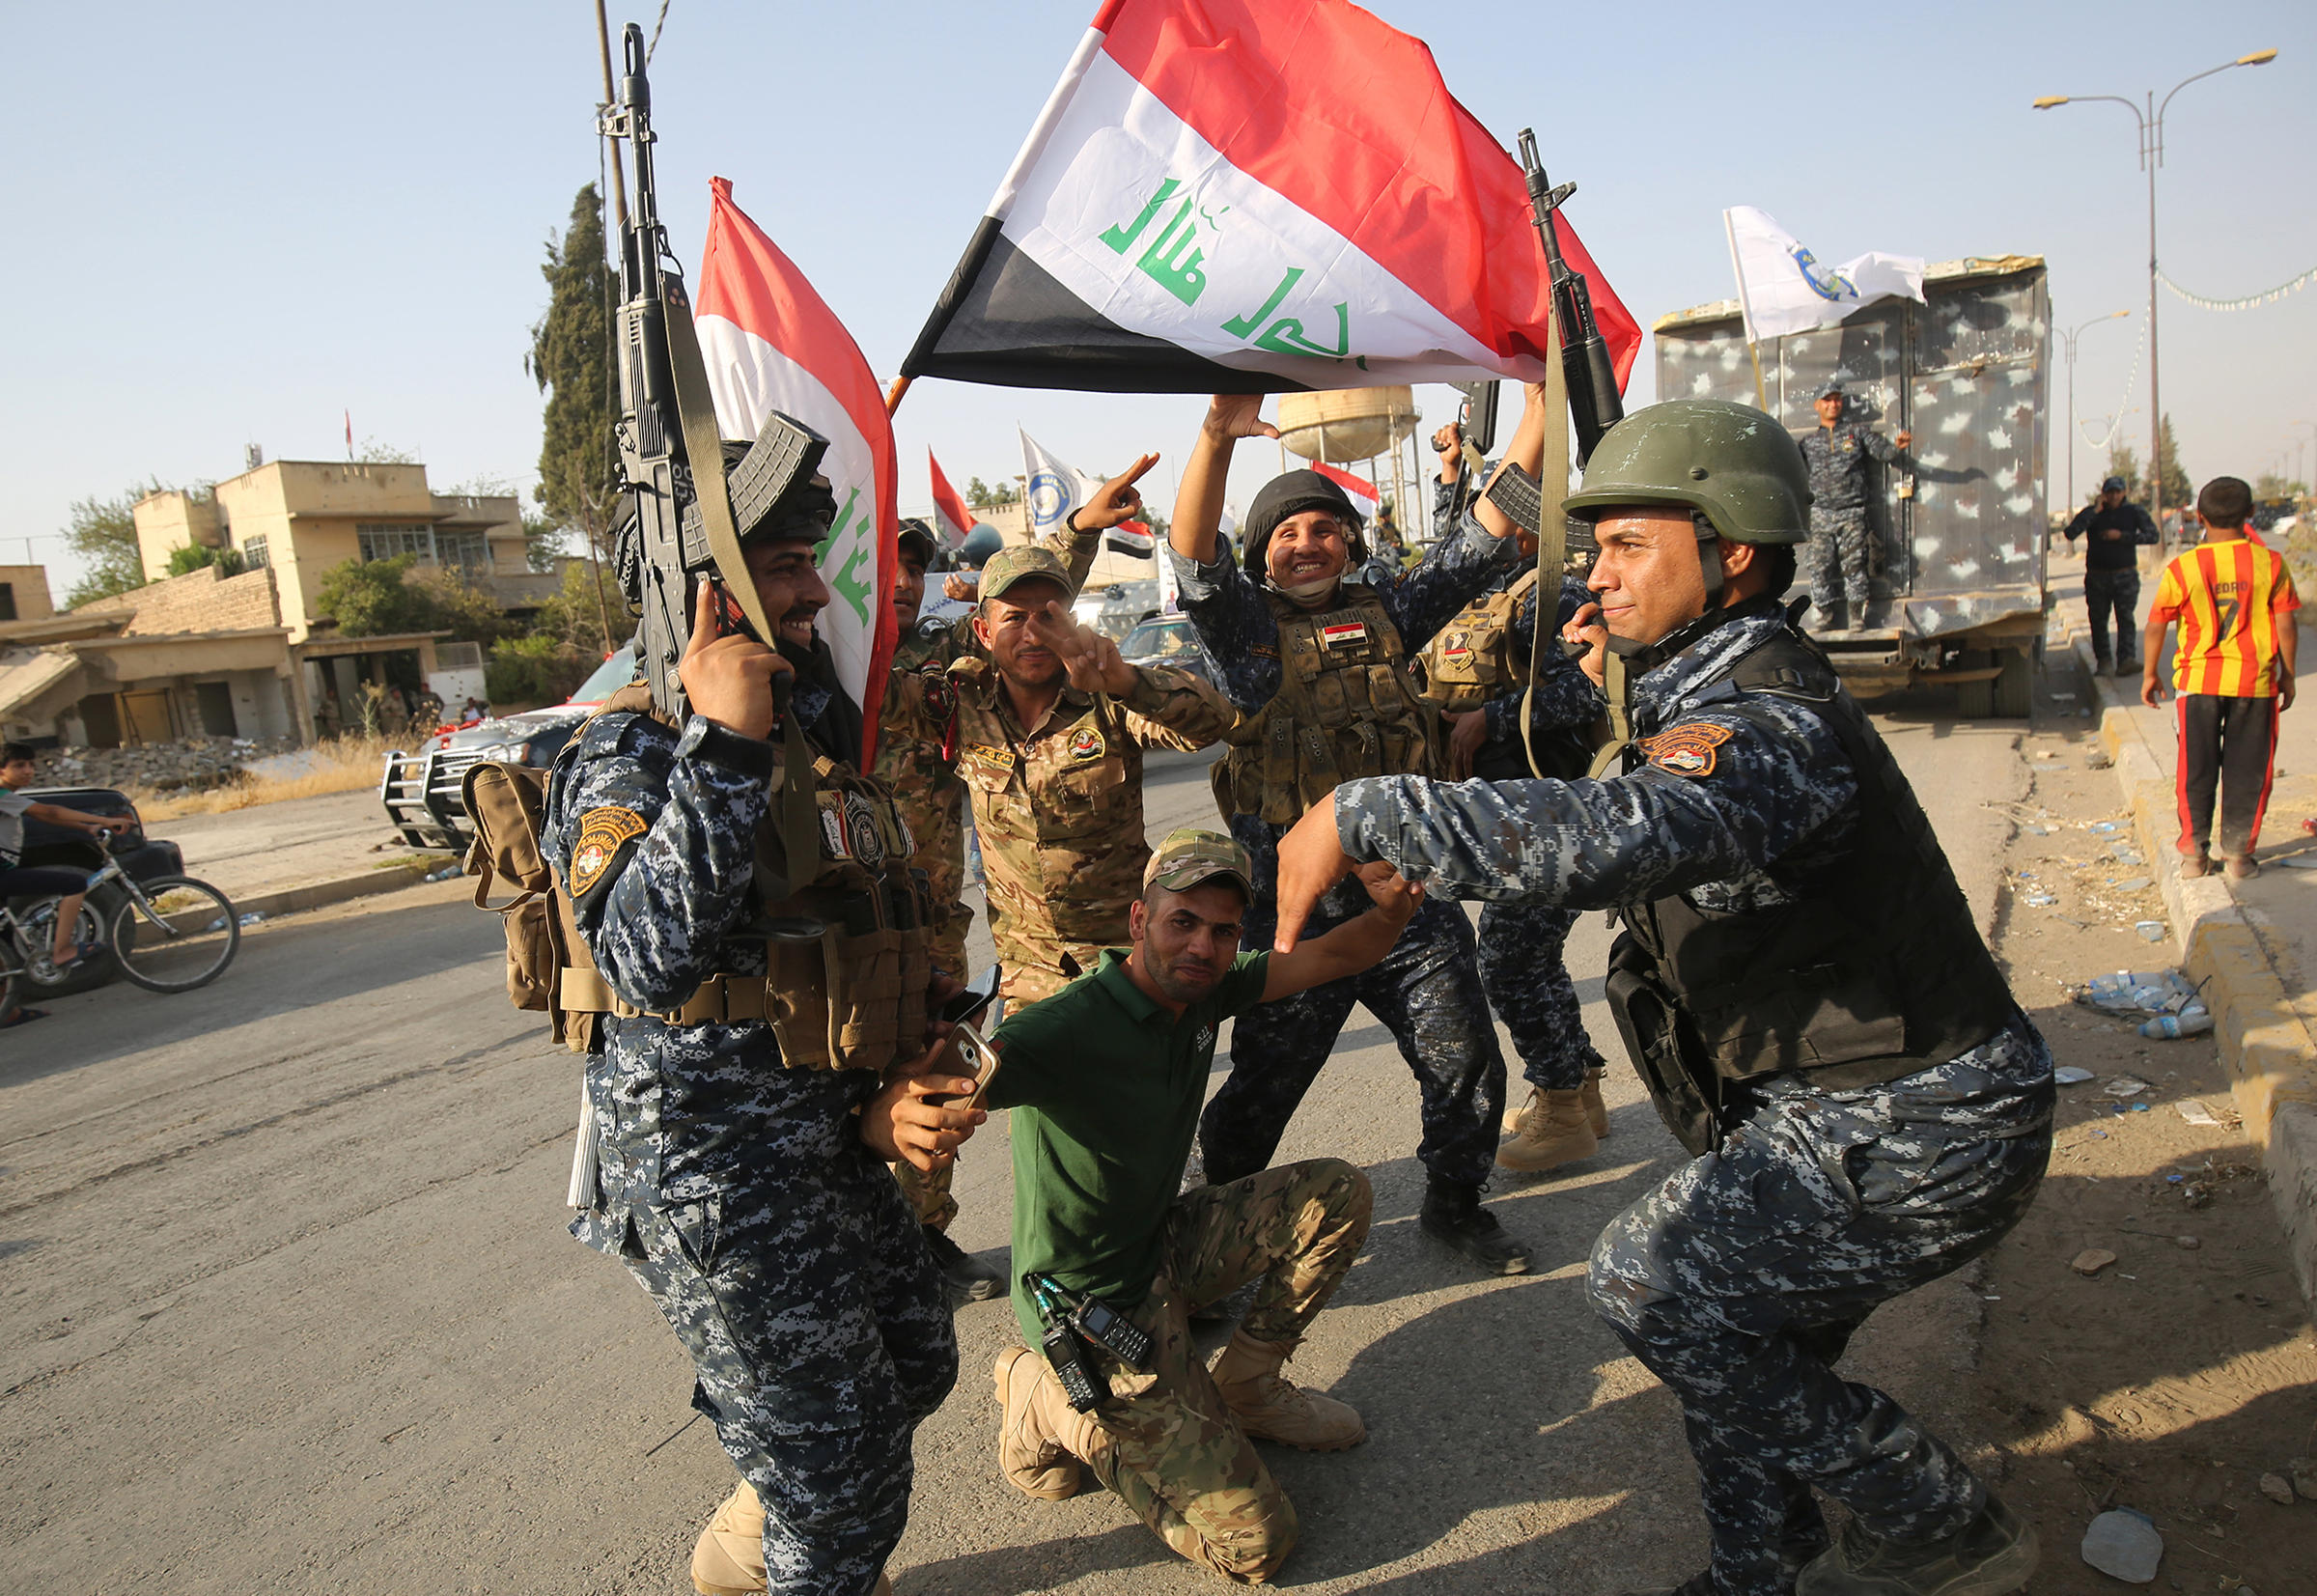 Mosul Has Been Liberated From ISIS Control, Iraq's Prime Minister Says